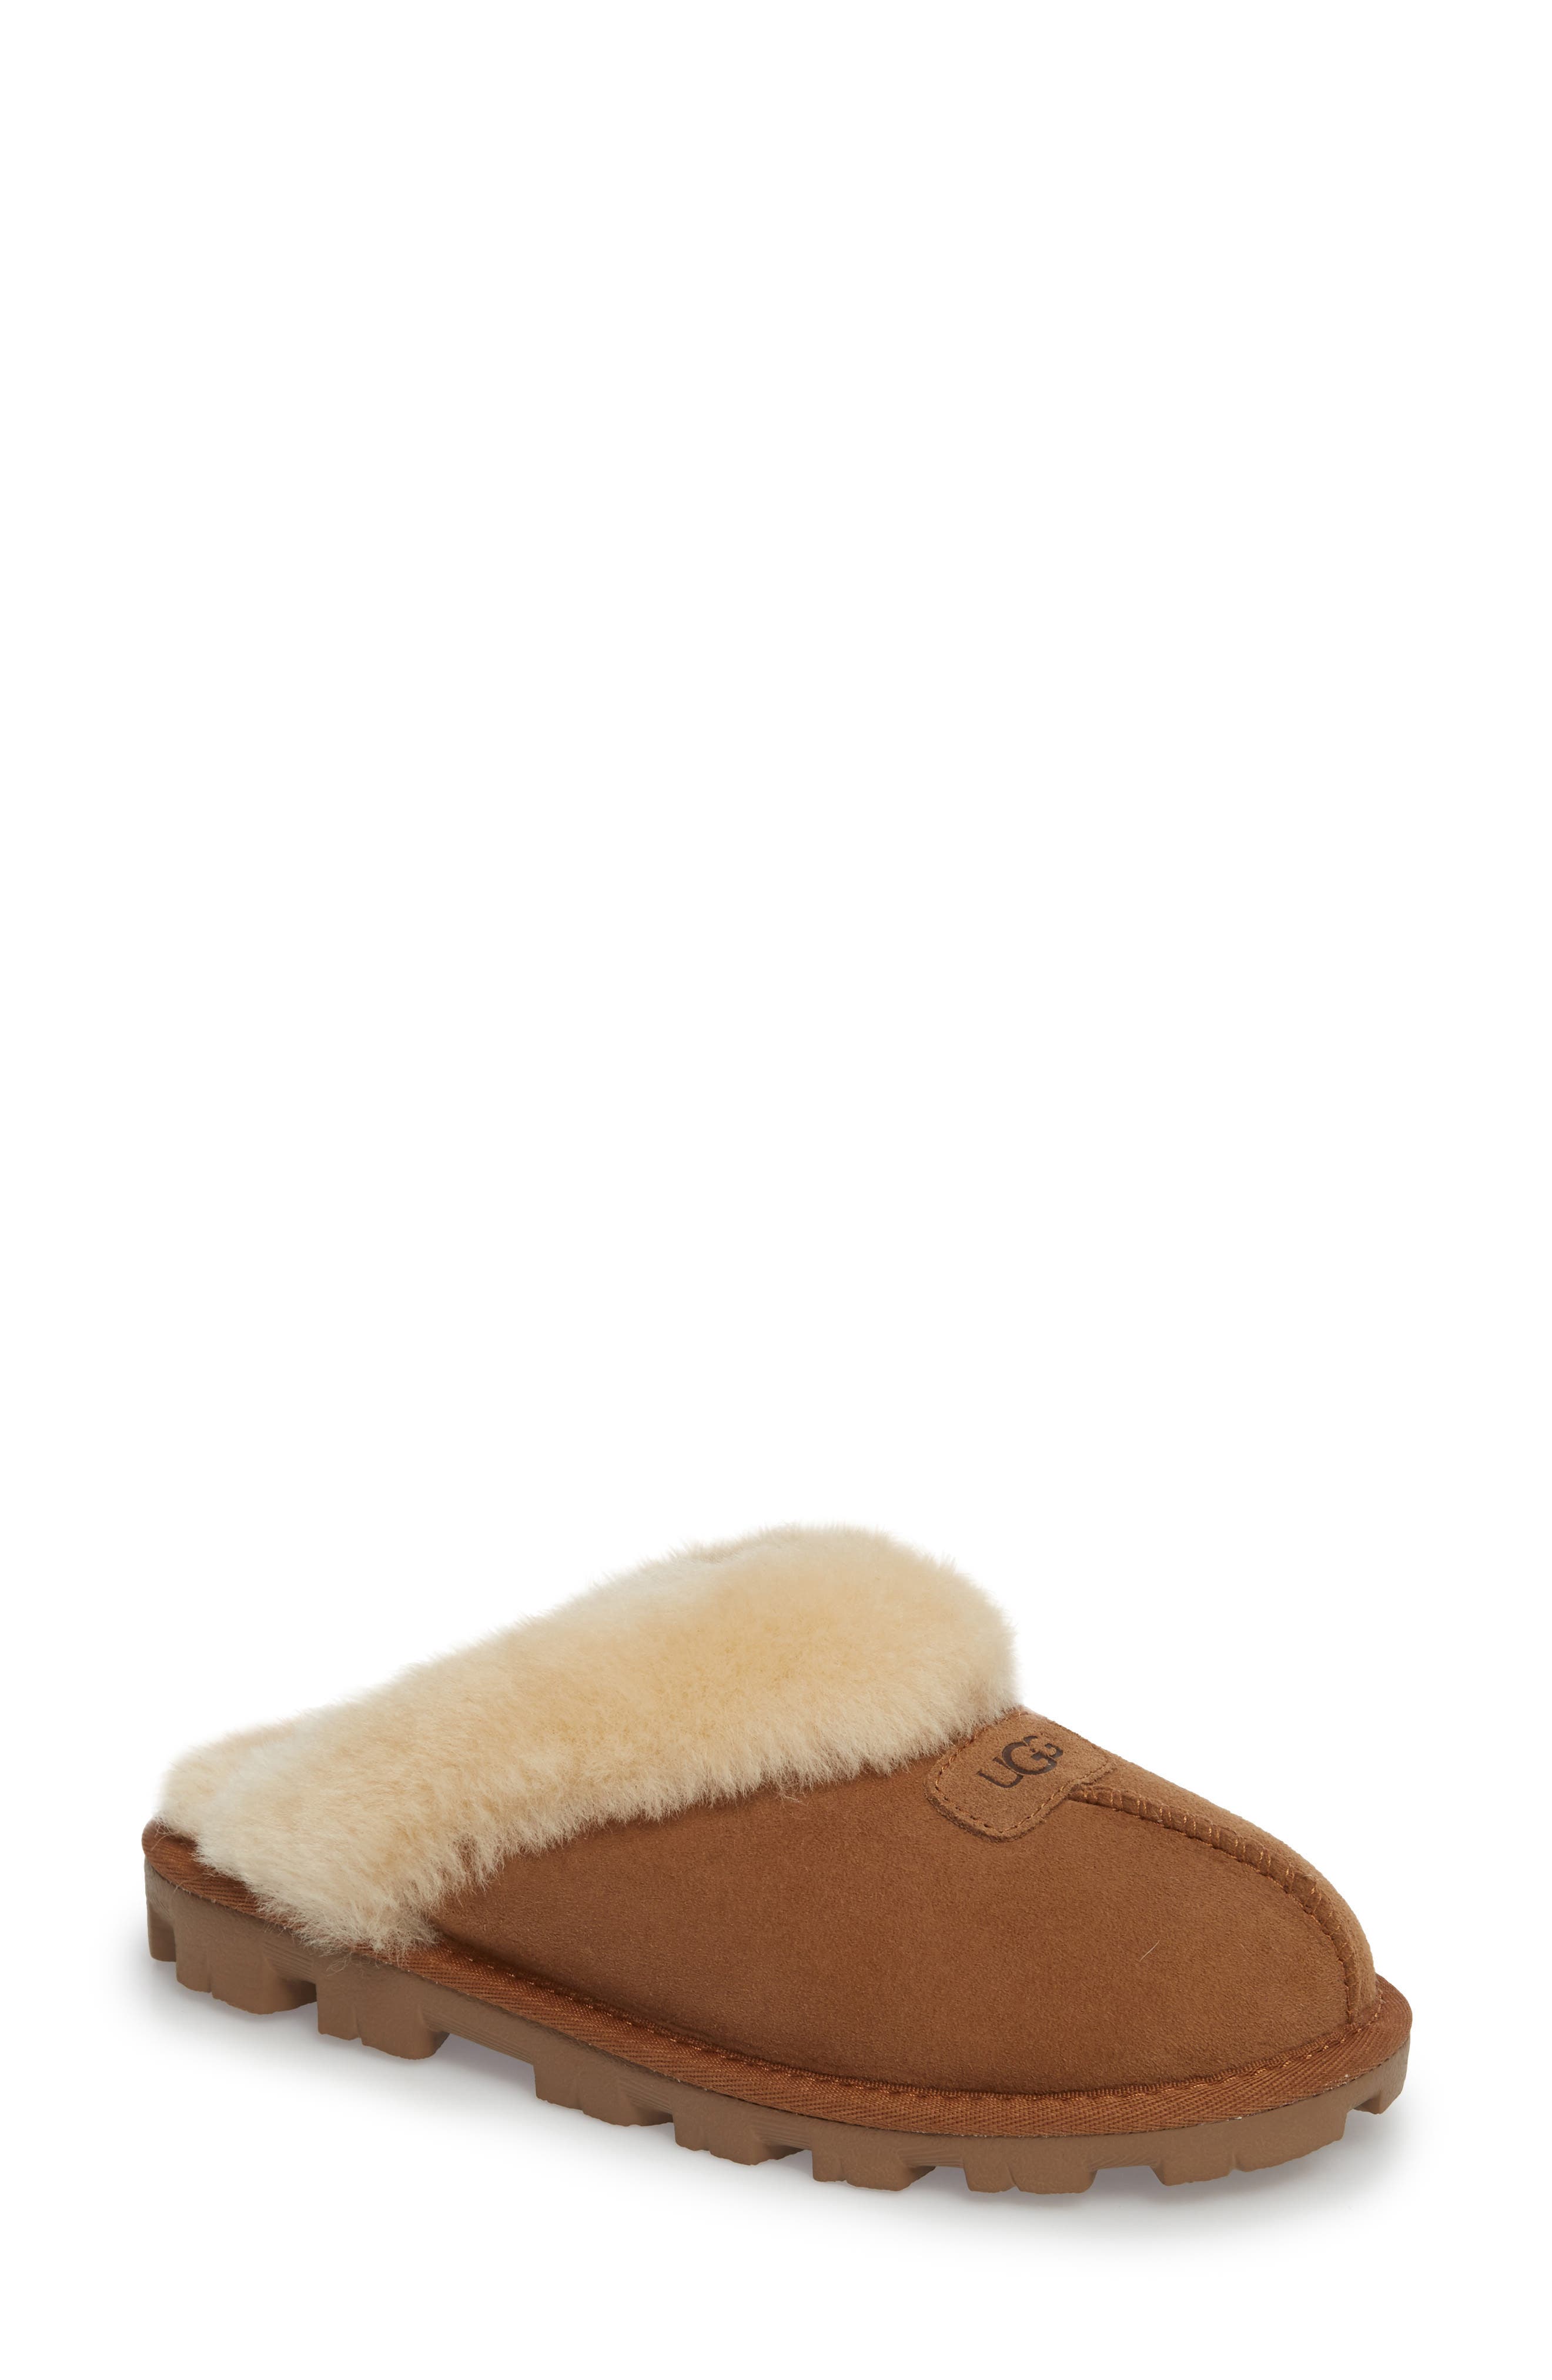 ugg slippers discount